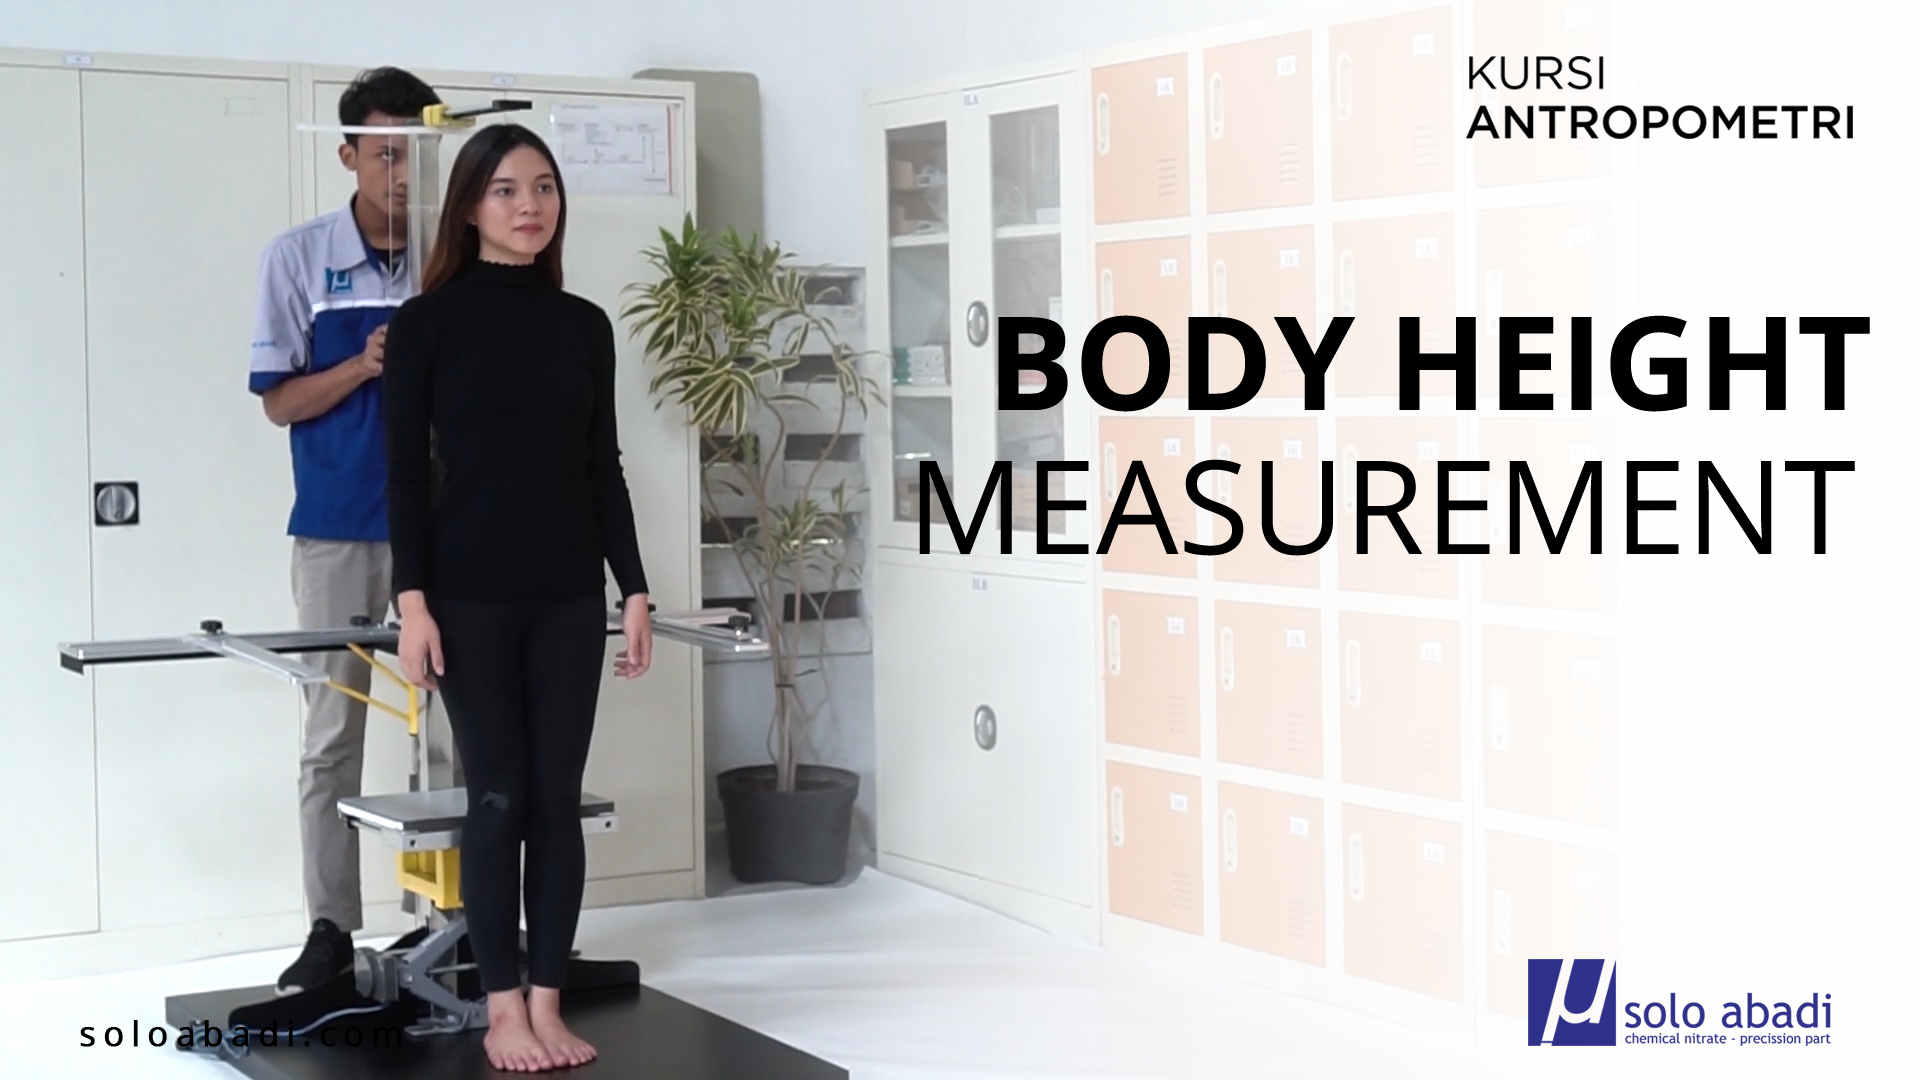 Body Height Measurement by Using Anthropometric Chair